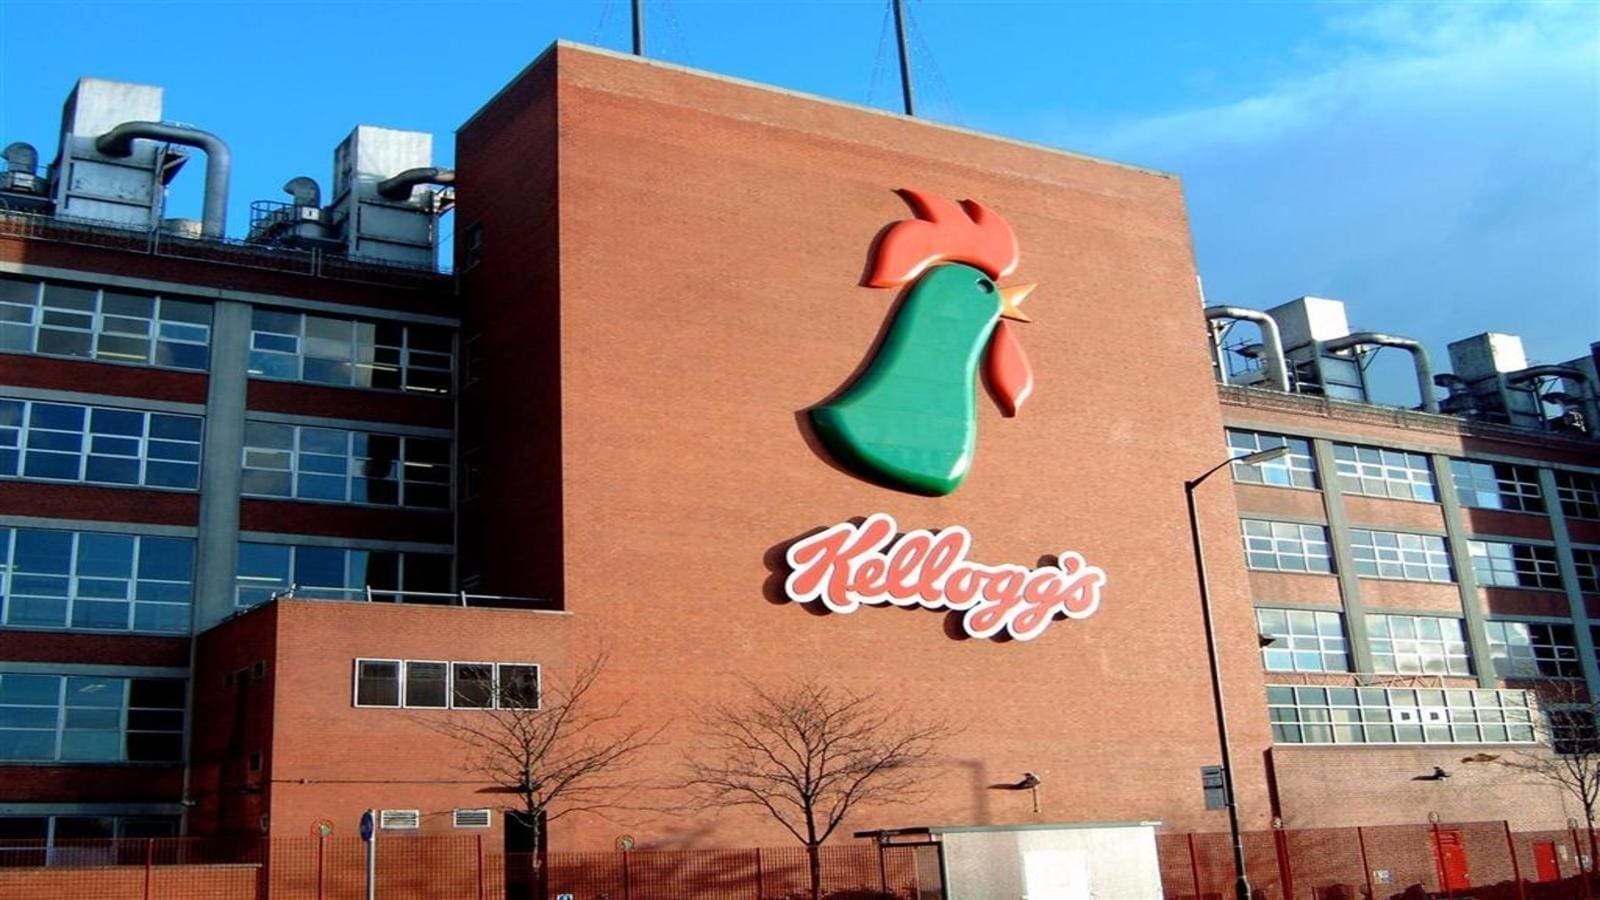 Kellogg raises full-year outlook as following strong growth in Q1